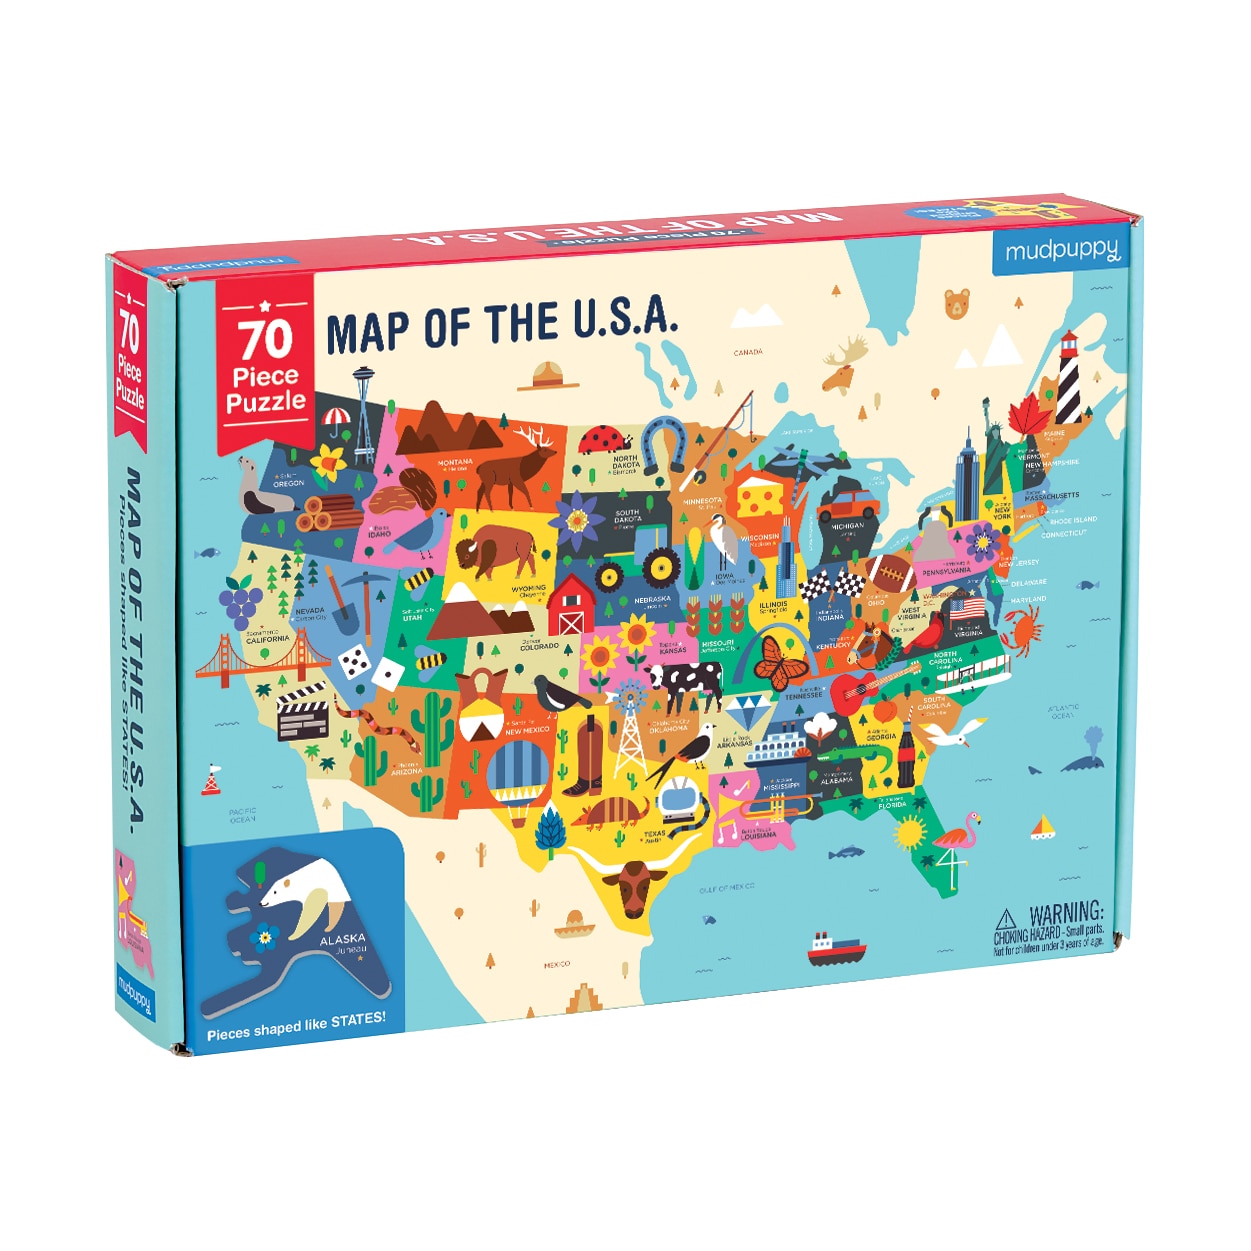 Map of the U.S.A. Puzzle